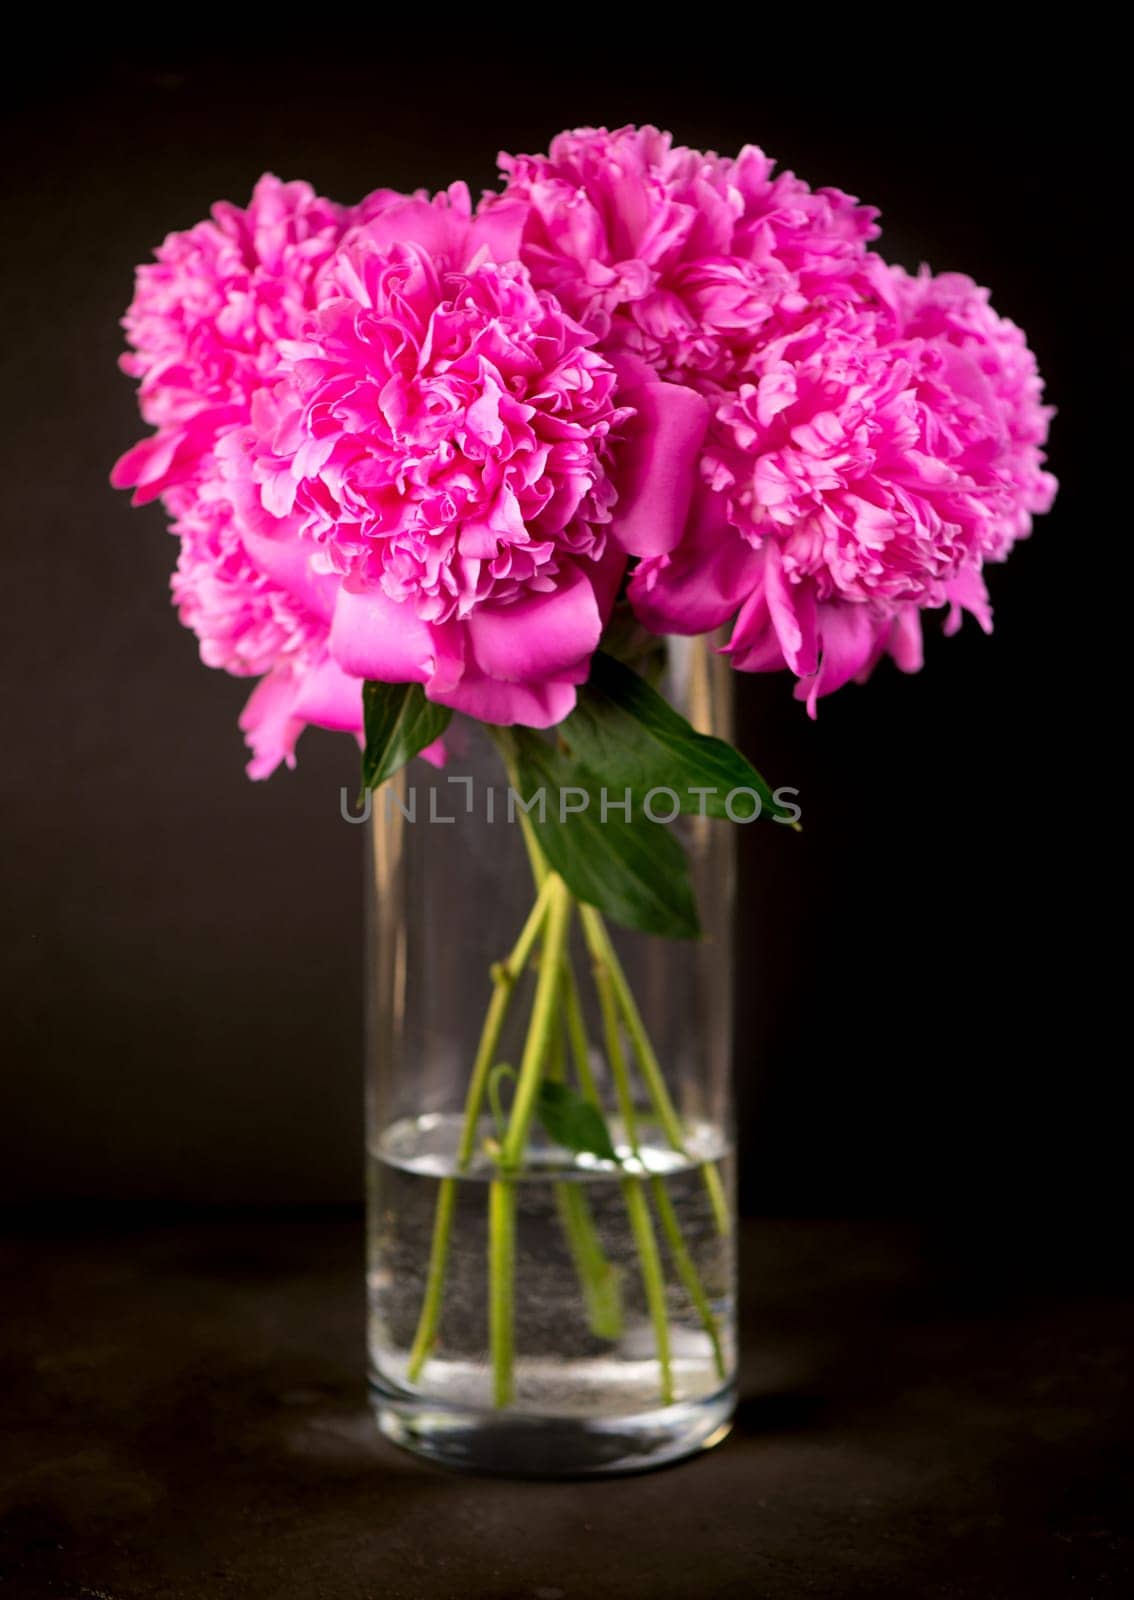 Pink floral background. Background bouquet of beautiful pink peonies. Blooming peony flowers, close-up. Wedding background, Valentine's day concept.